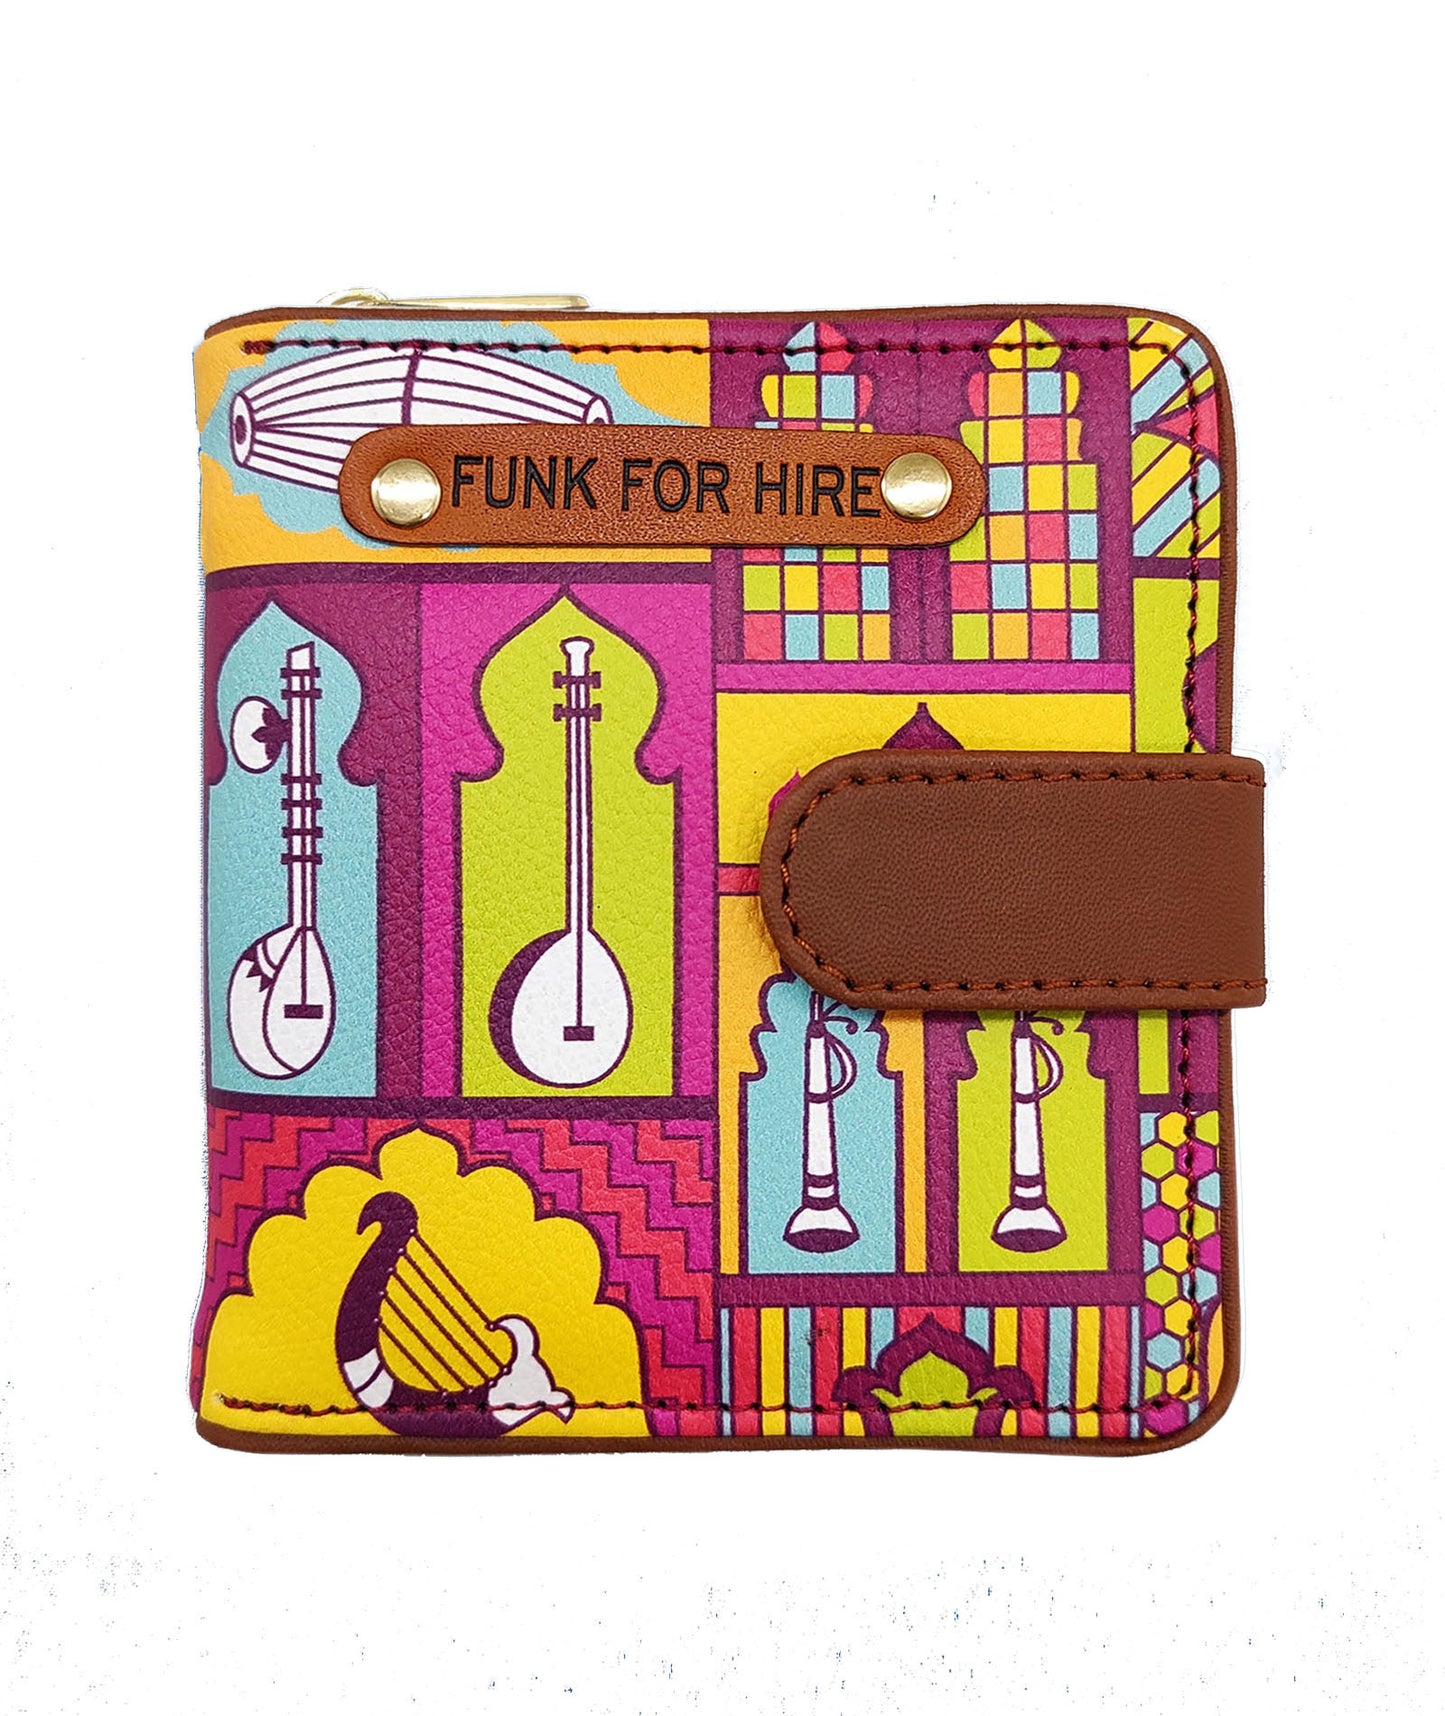 Combo Offers : Music Wall Loop Purple & Pocket Music Wall Wallet Navy